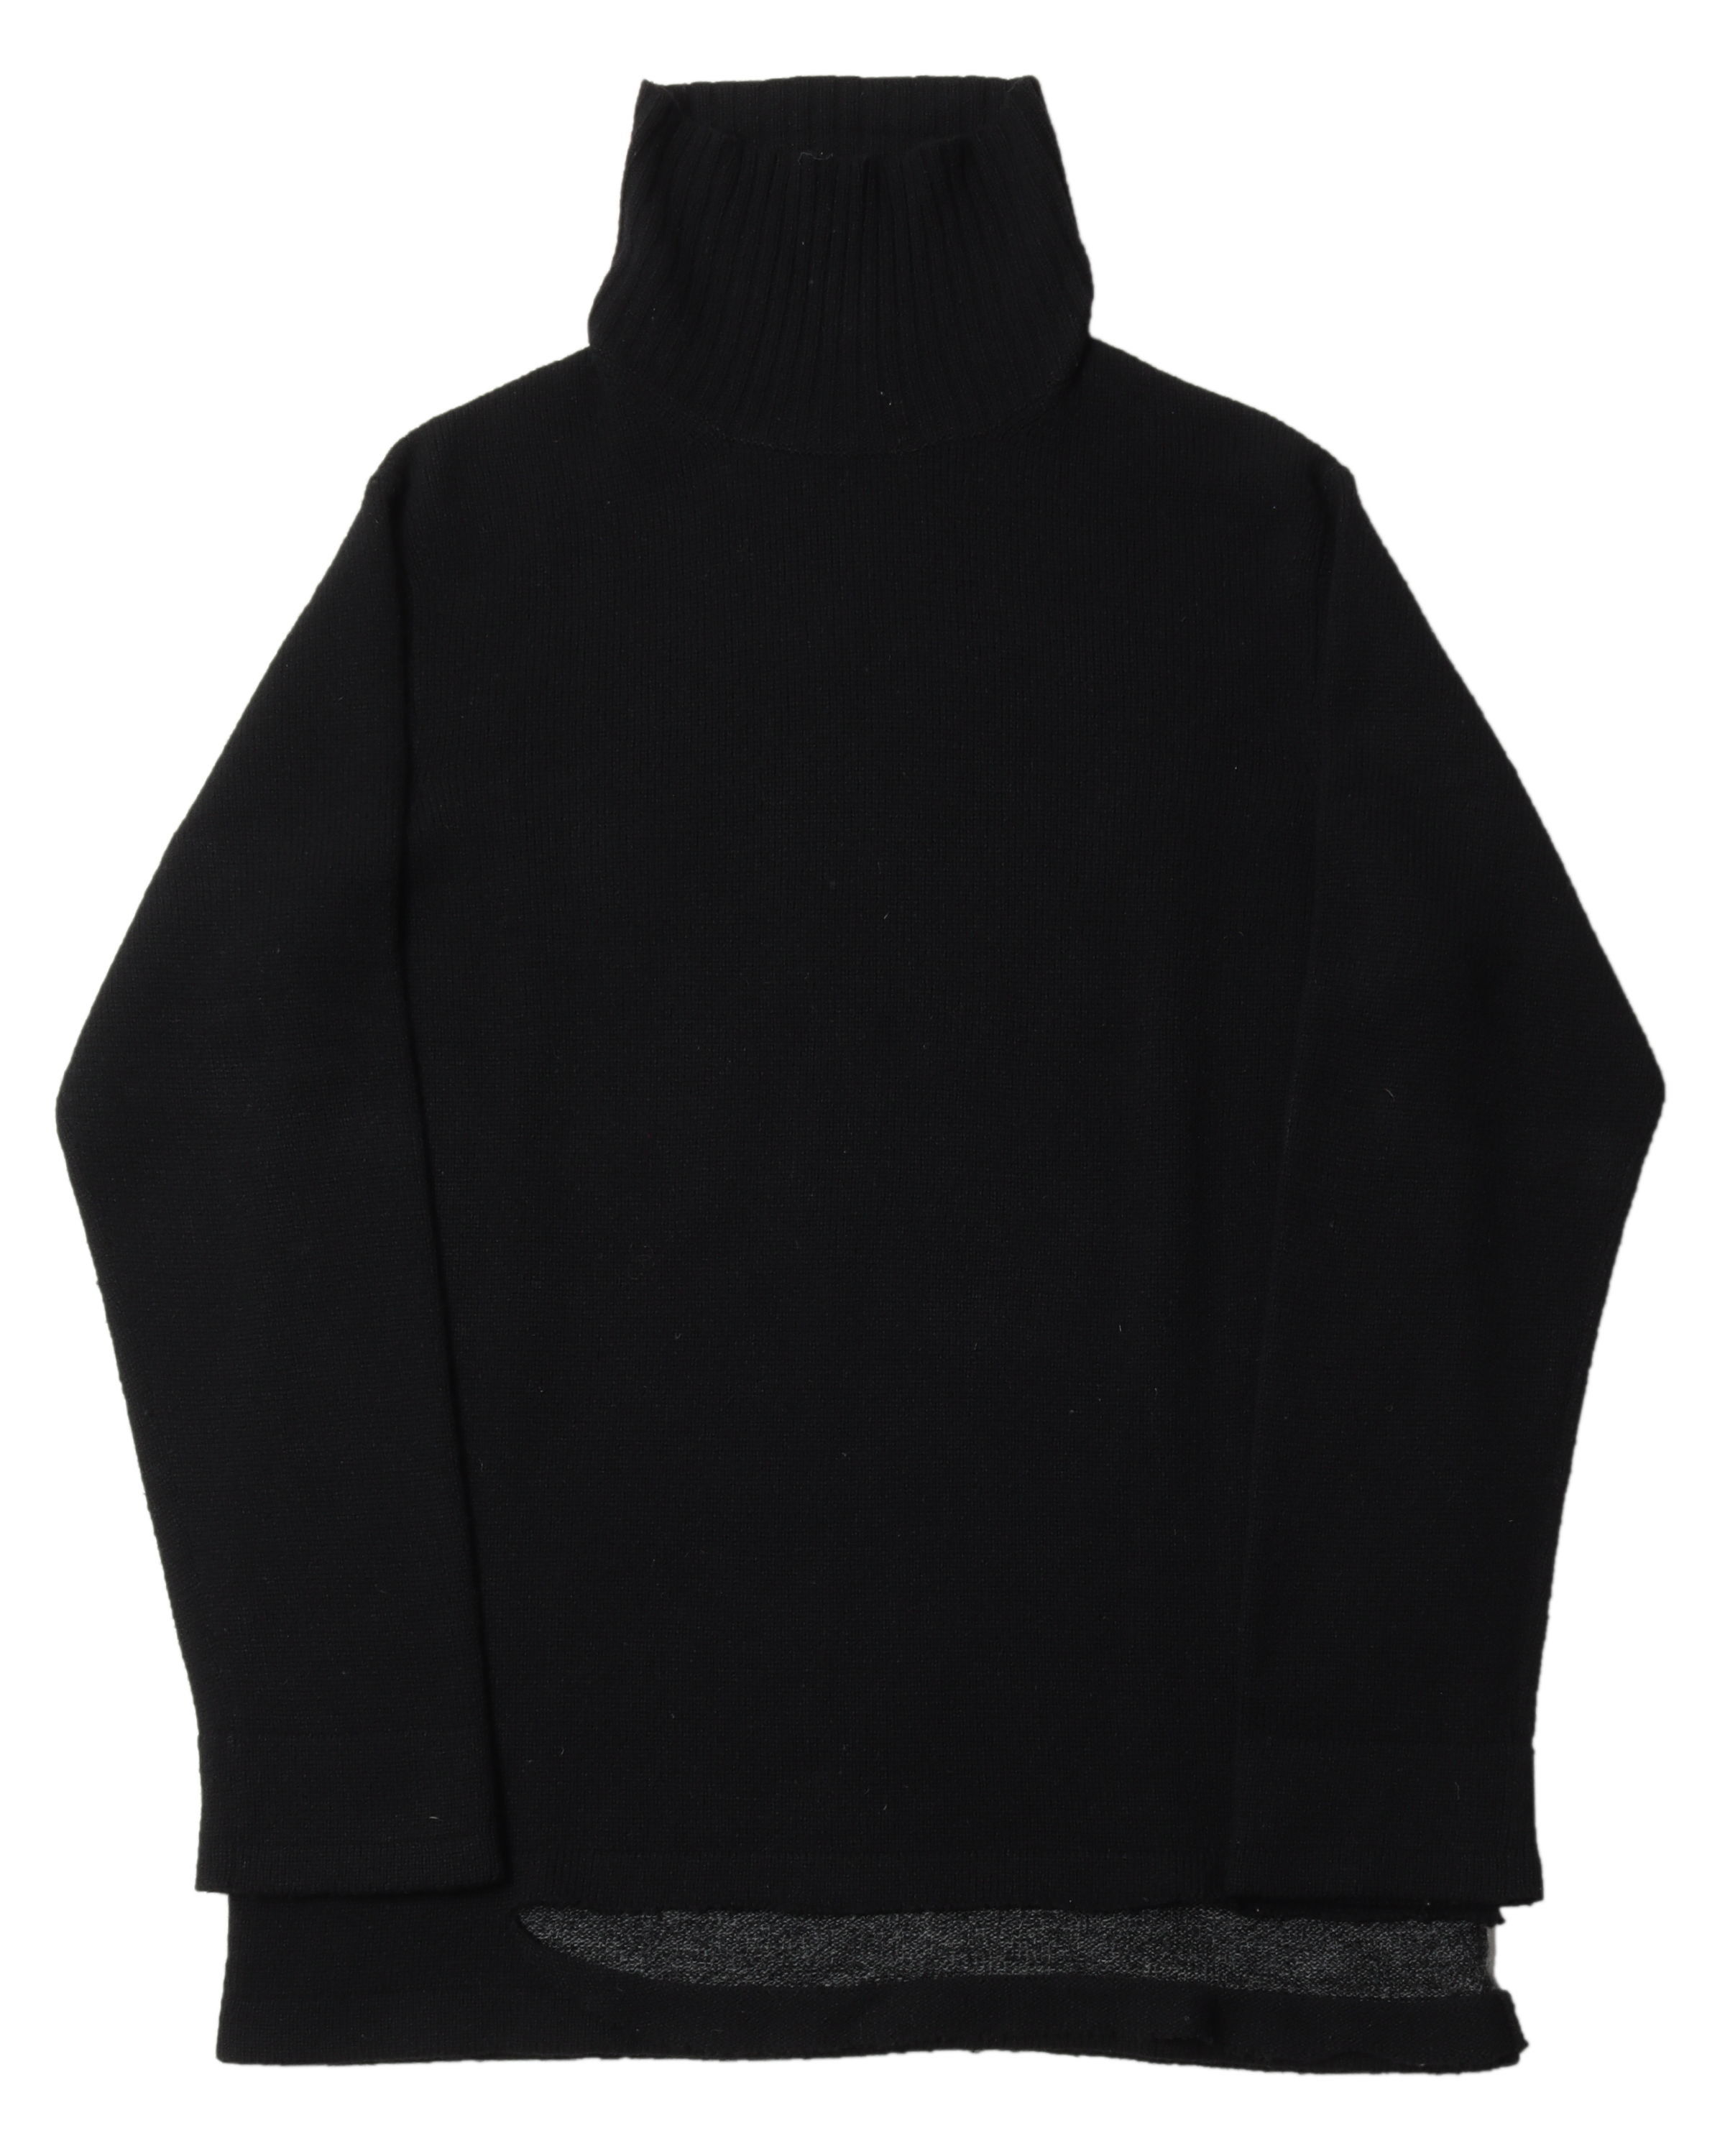 Pour Homme Wool Turtleneck Sweater